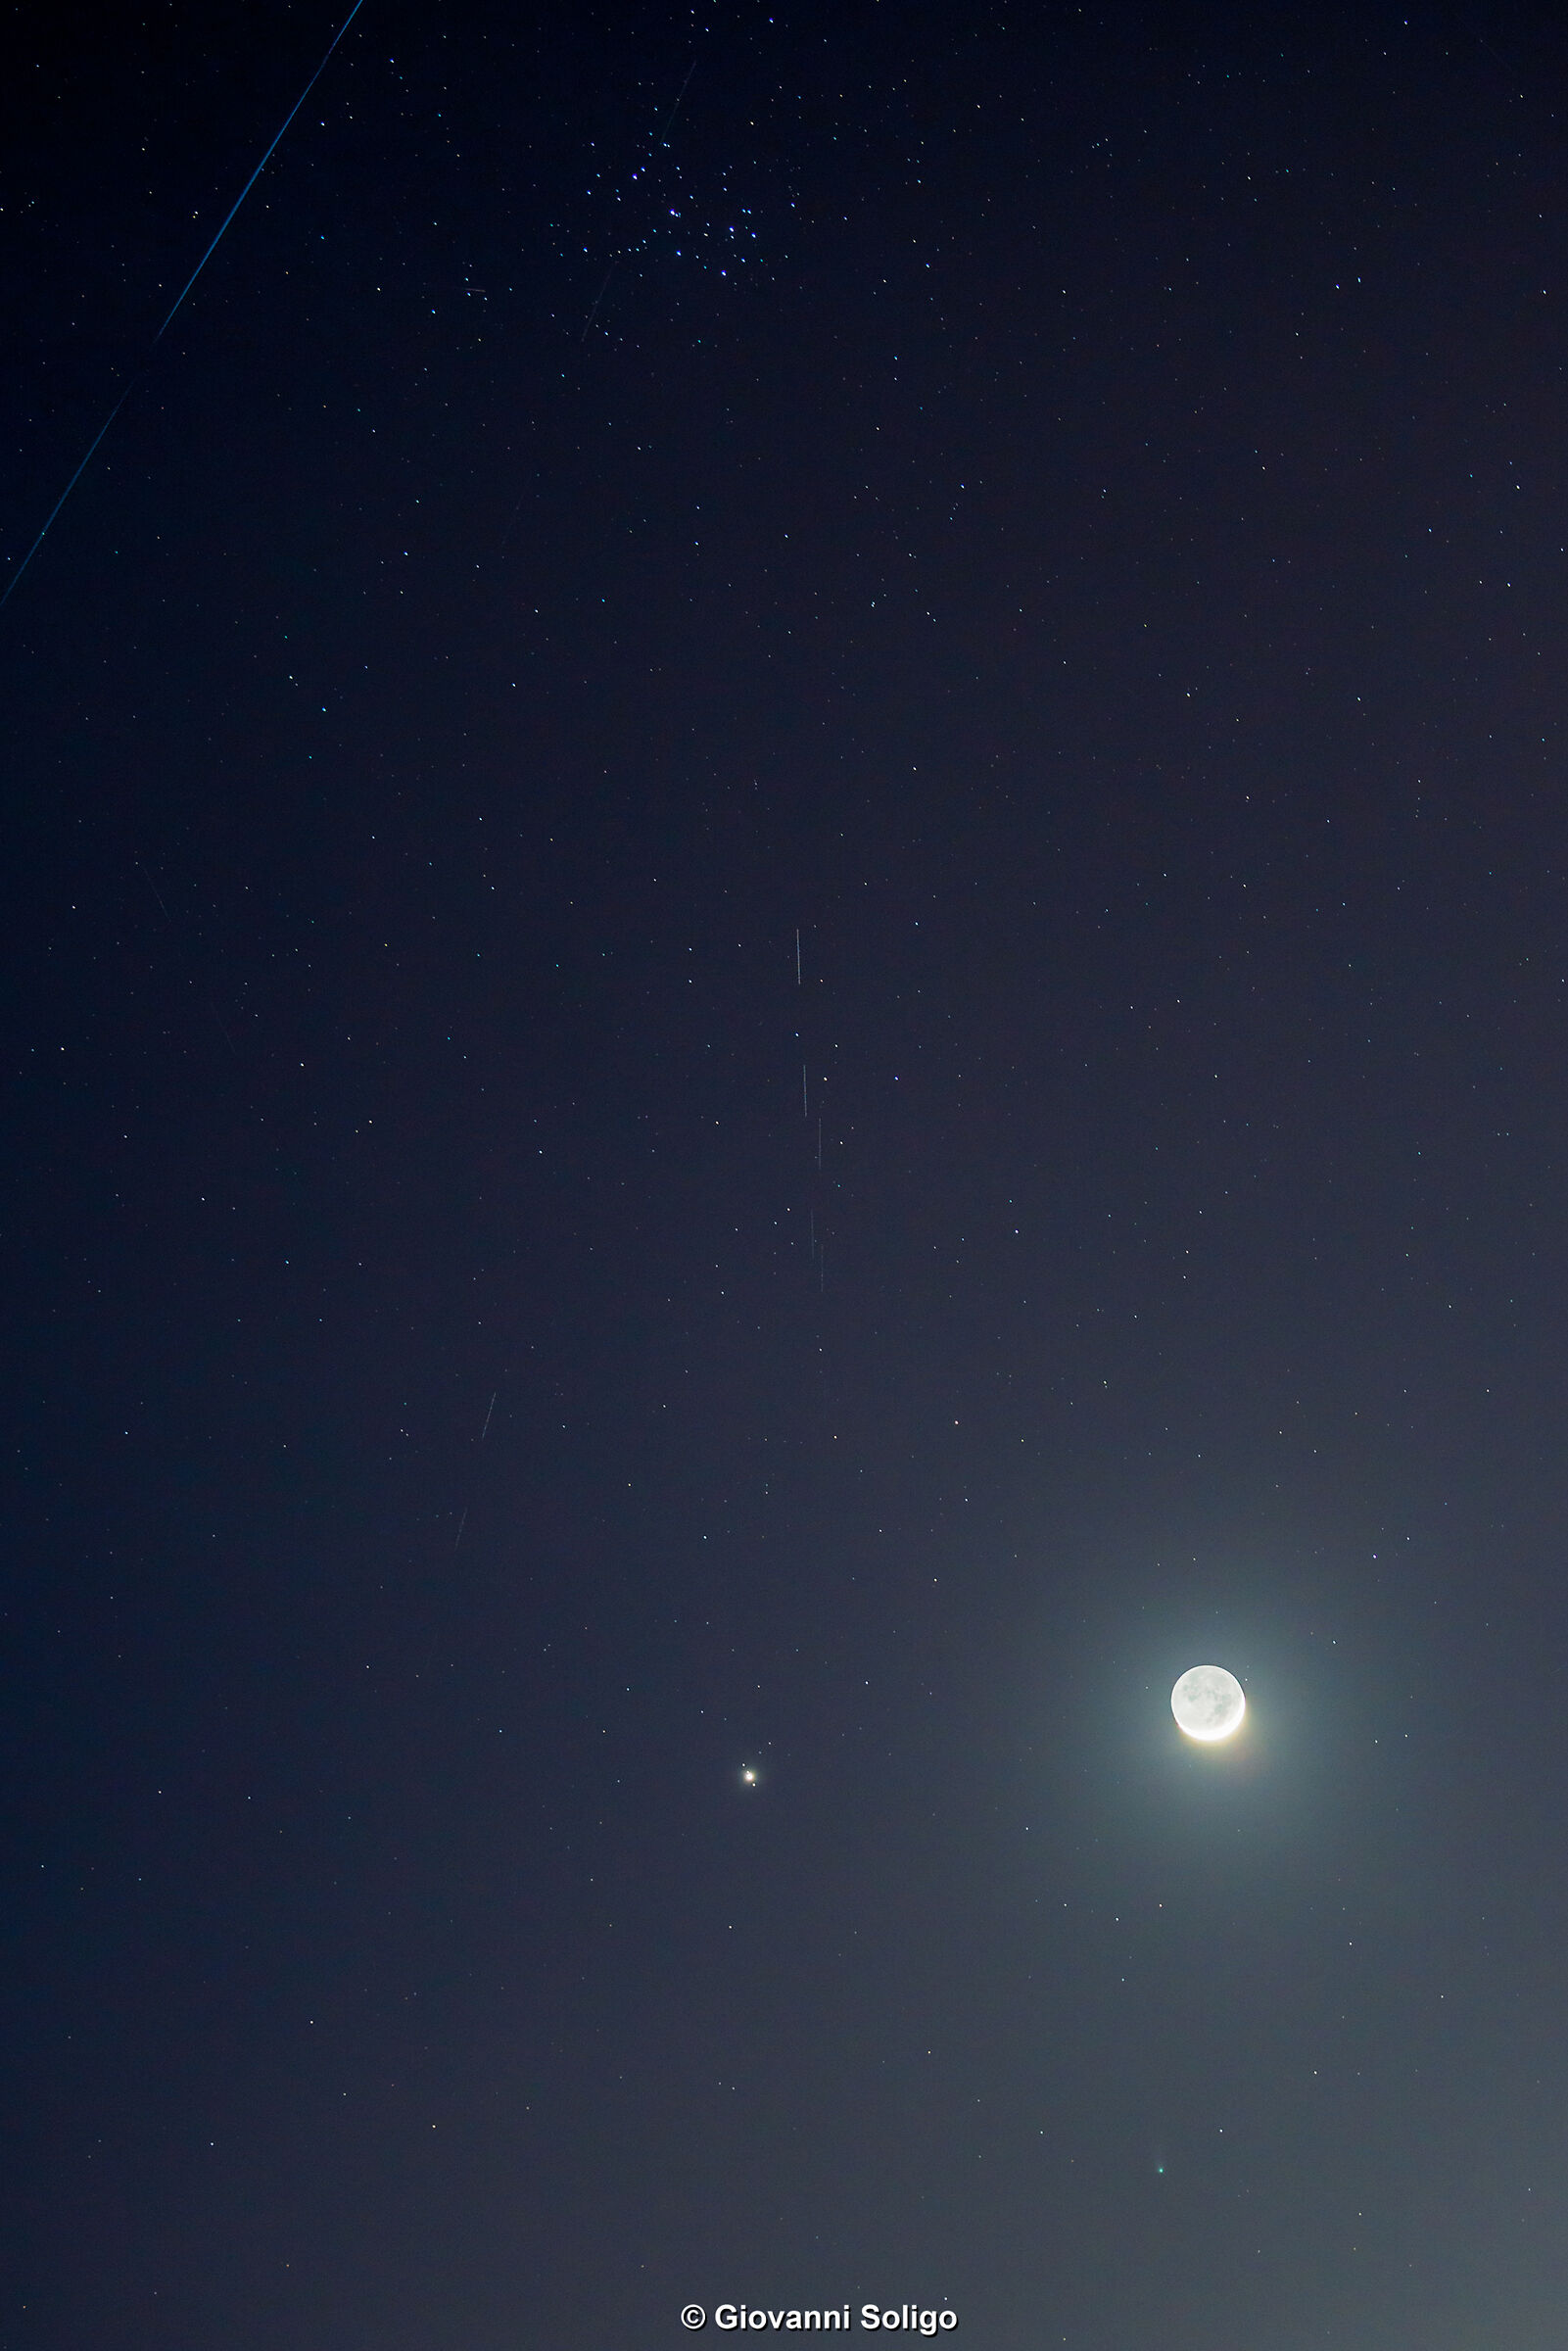 Comet 12P with Jupiter, Moon, Pleiades and Starlink...